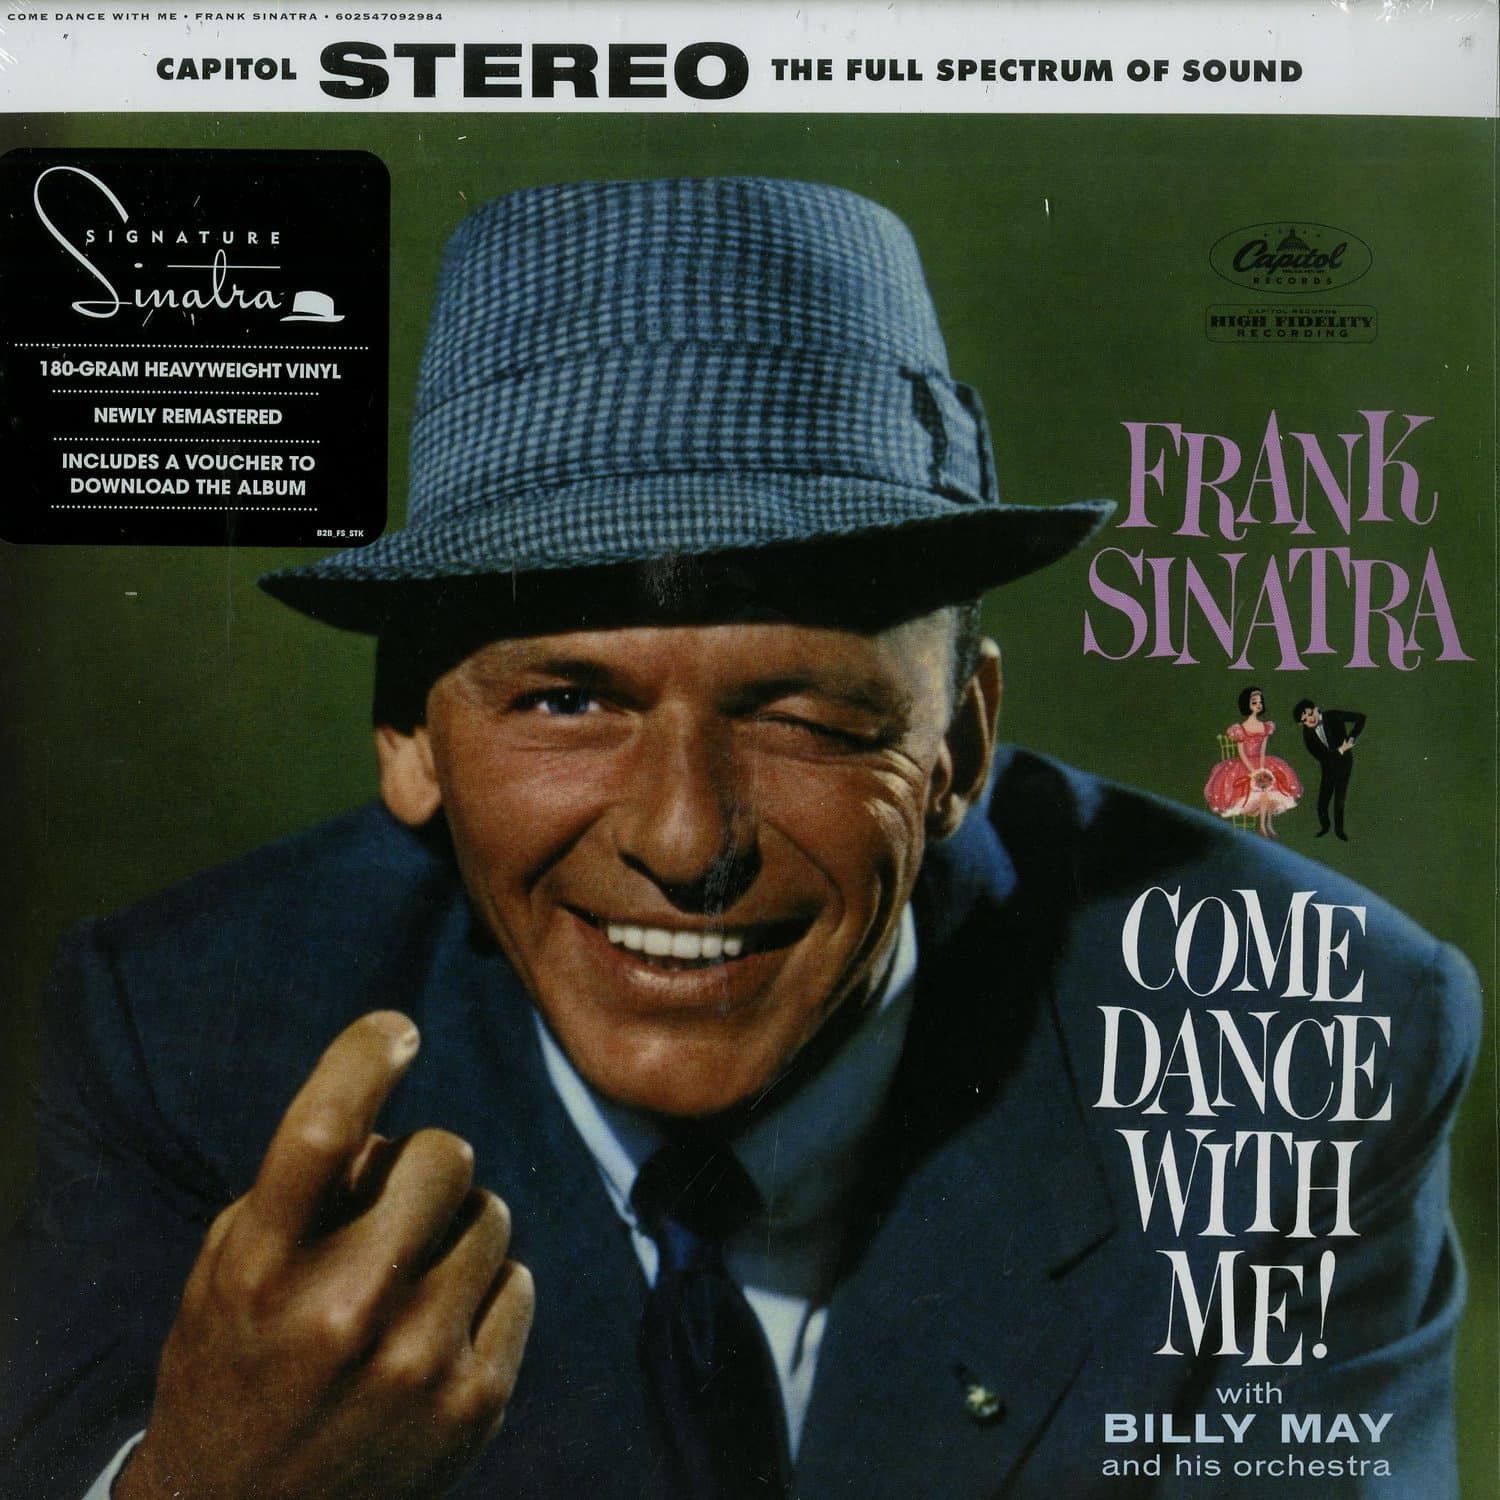 Frank Sinatra with Billy May and his Orchestra - COME DANCE WITH ME! 